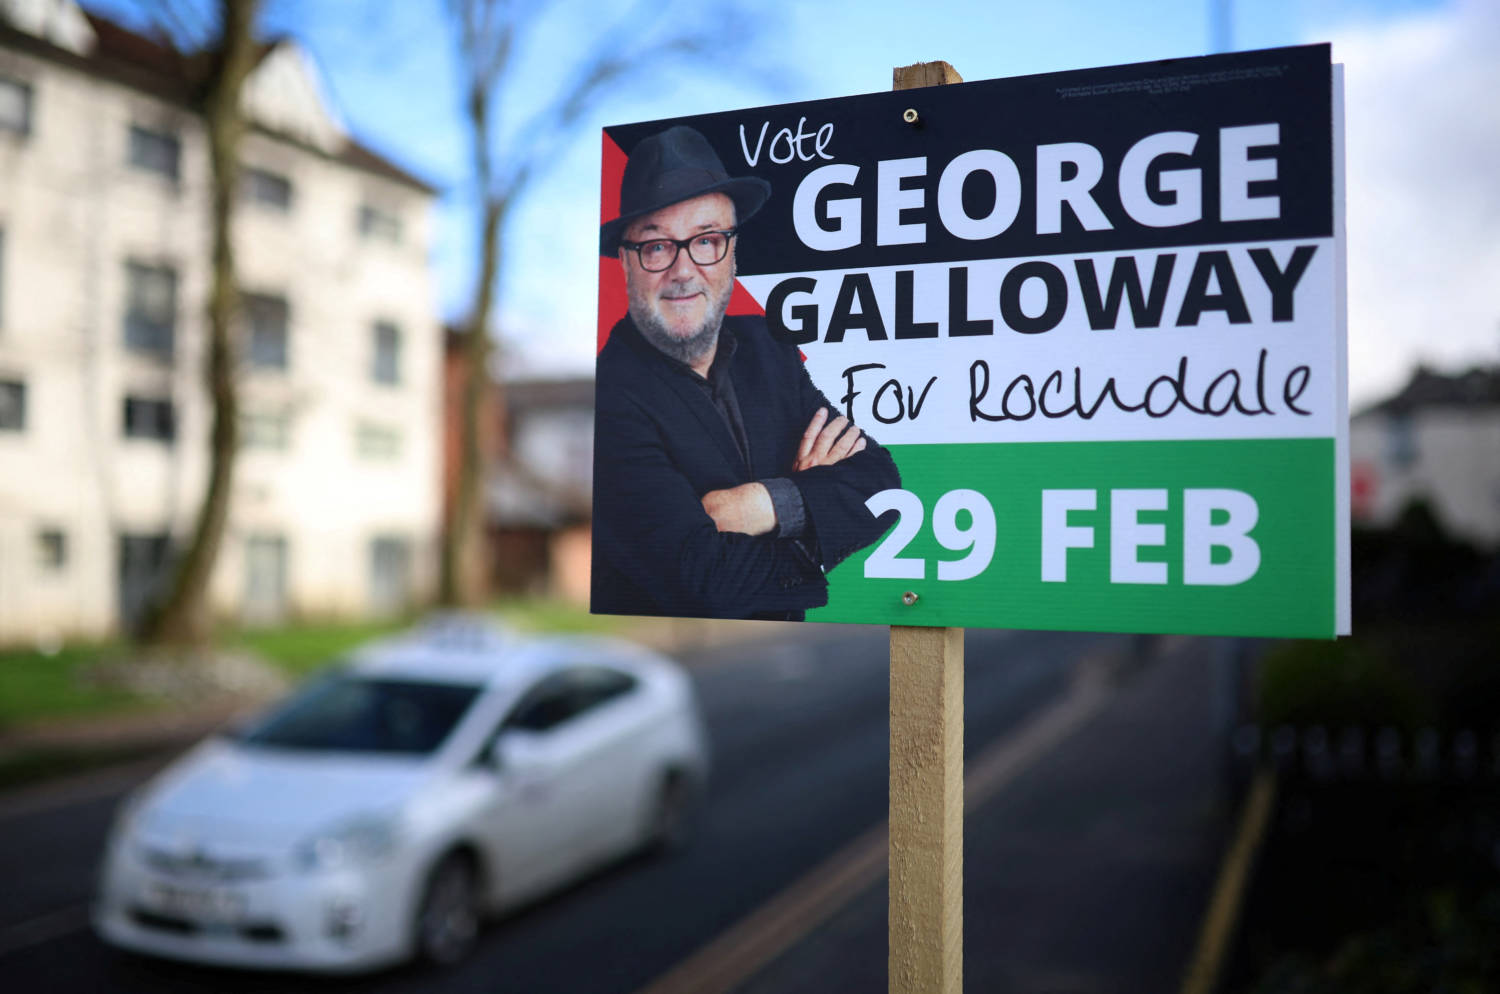 An Election Board Encouraging People To Vote For Candidate George Galloway, Leader Of The Workers Party Of Britain, Ahead Of The Upcoming Parliamentary By Election In Rochdale, Britain